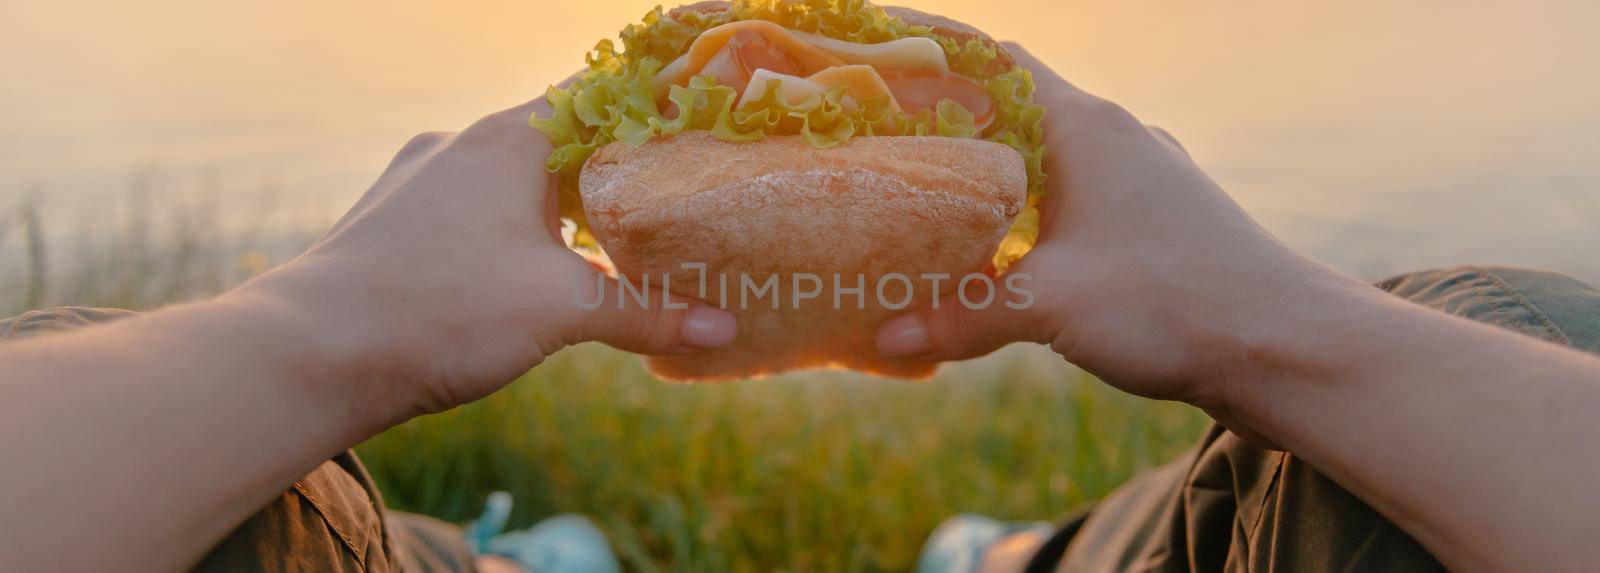 Unrecognizable young woman holding fast food fresh burger sandwich while resting on nature, point of view.